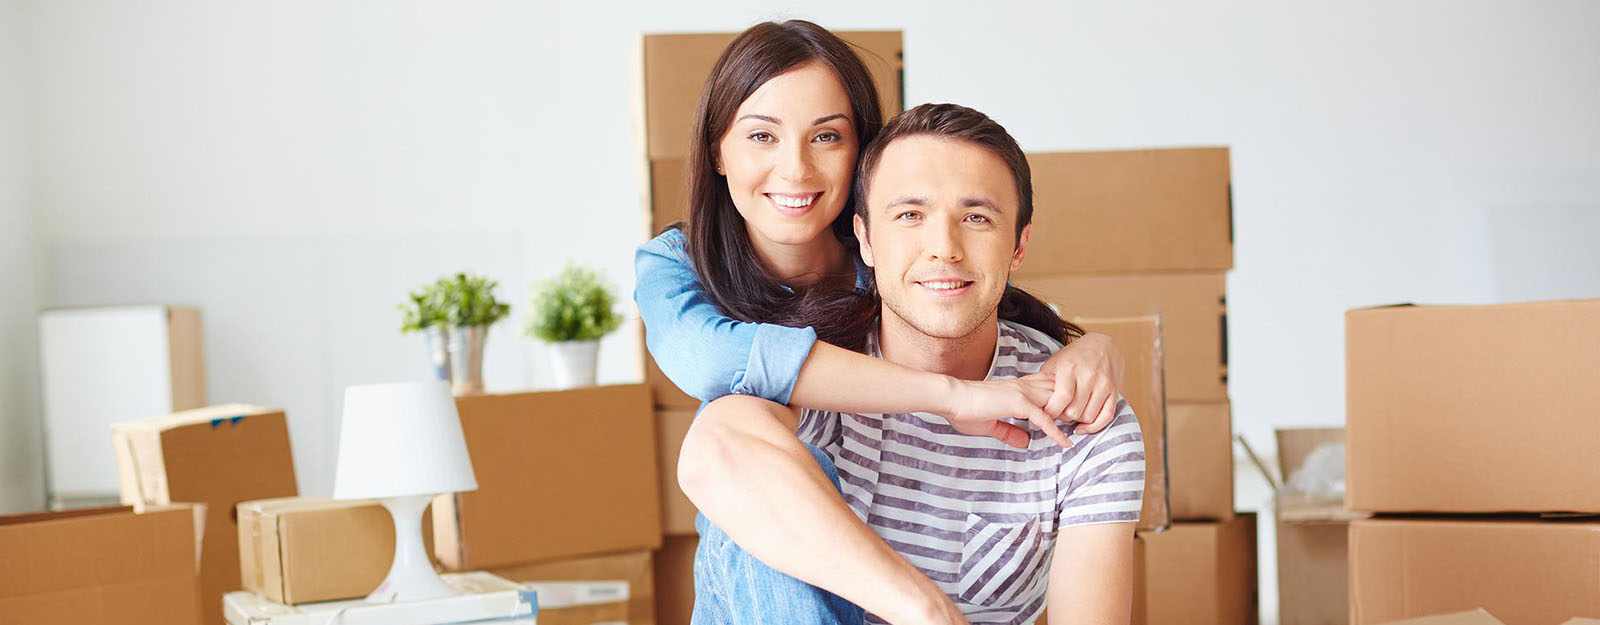 First time home buyer mortgage loan grants through Union State Bank. Young couple with unpacked boxes.